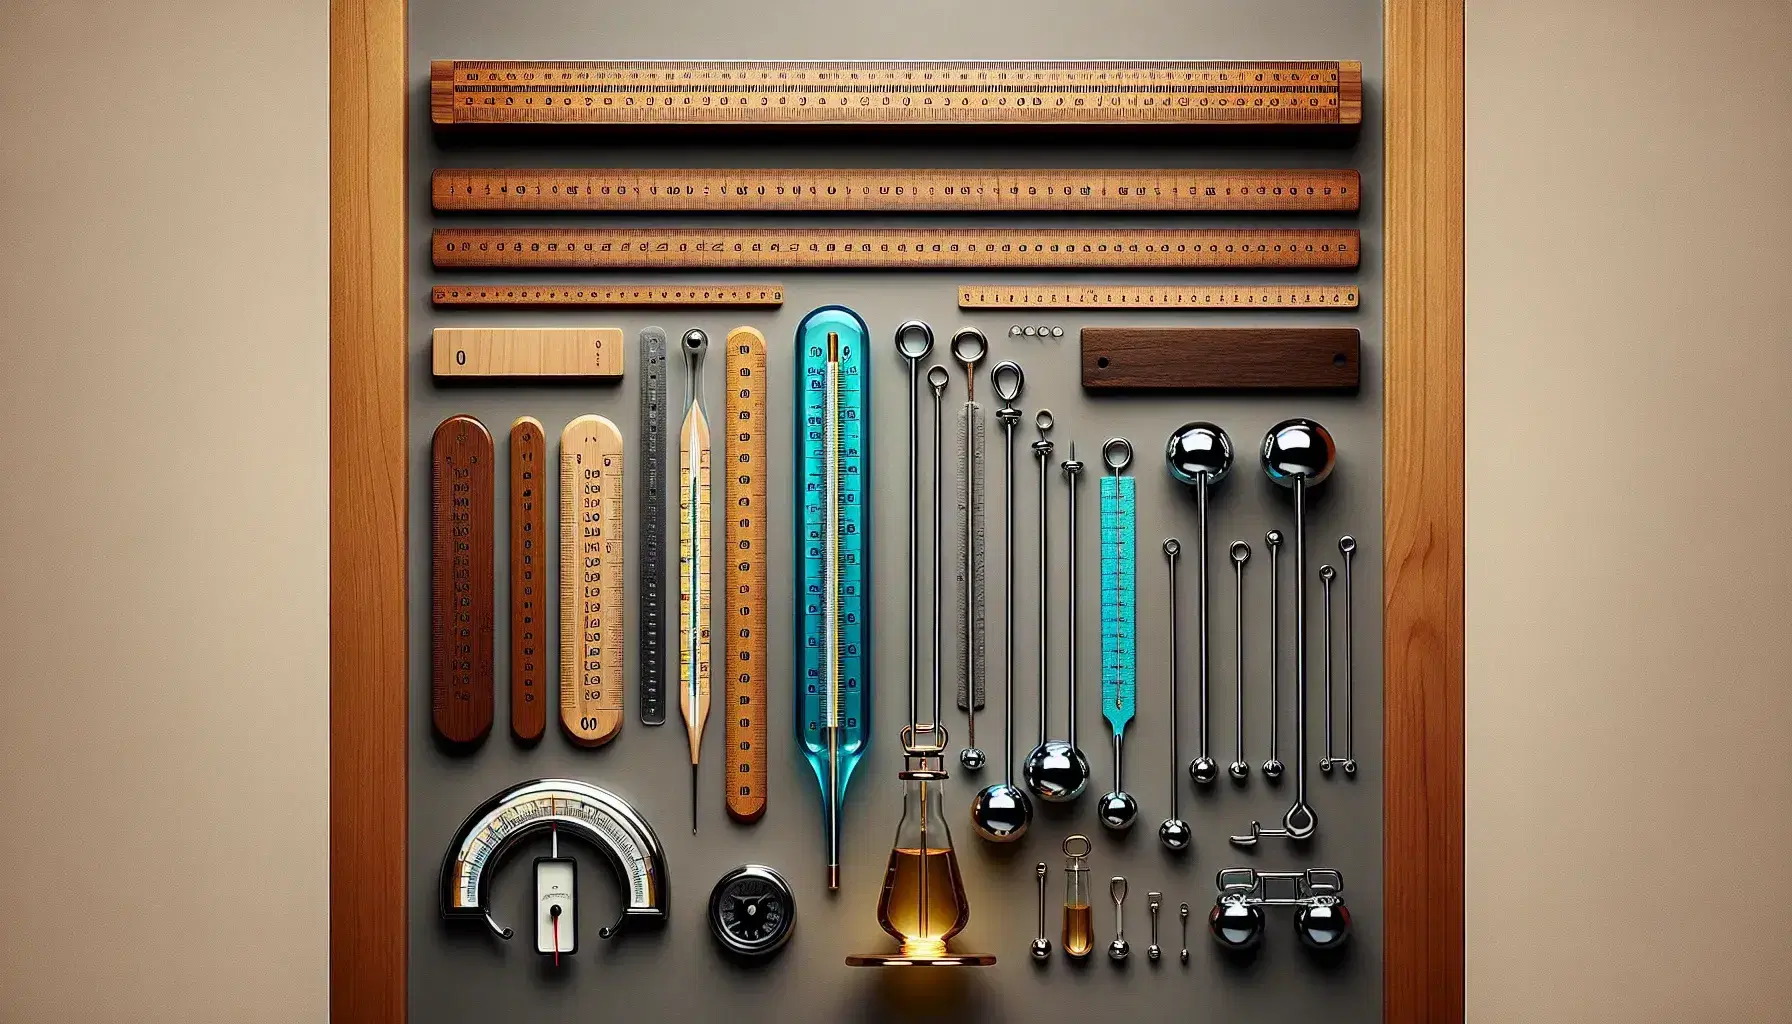 Assorted measurement tools including metric rulers, a mercury thermometer indicating room temperature, and a set of imperial weights on a gray background.